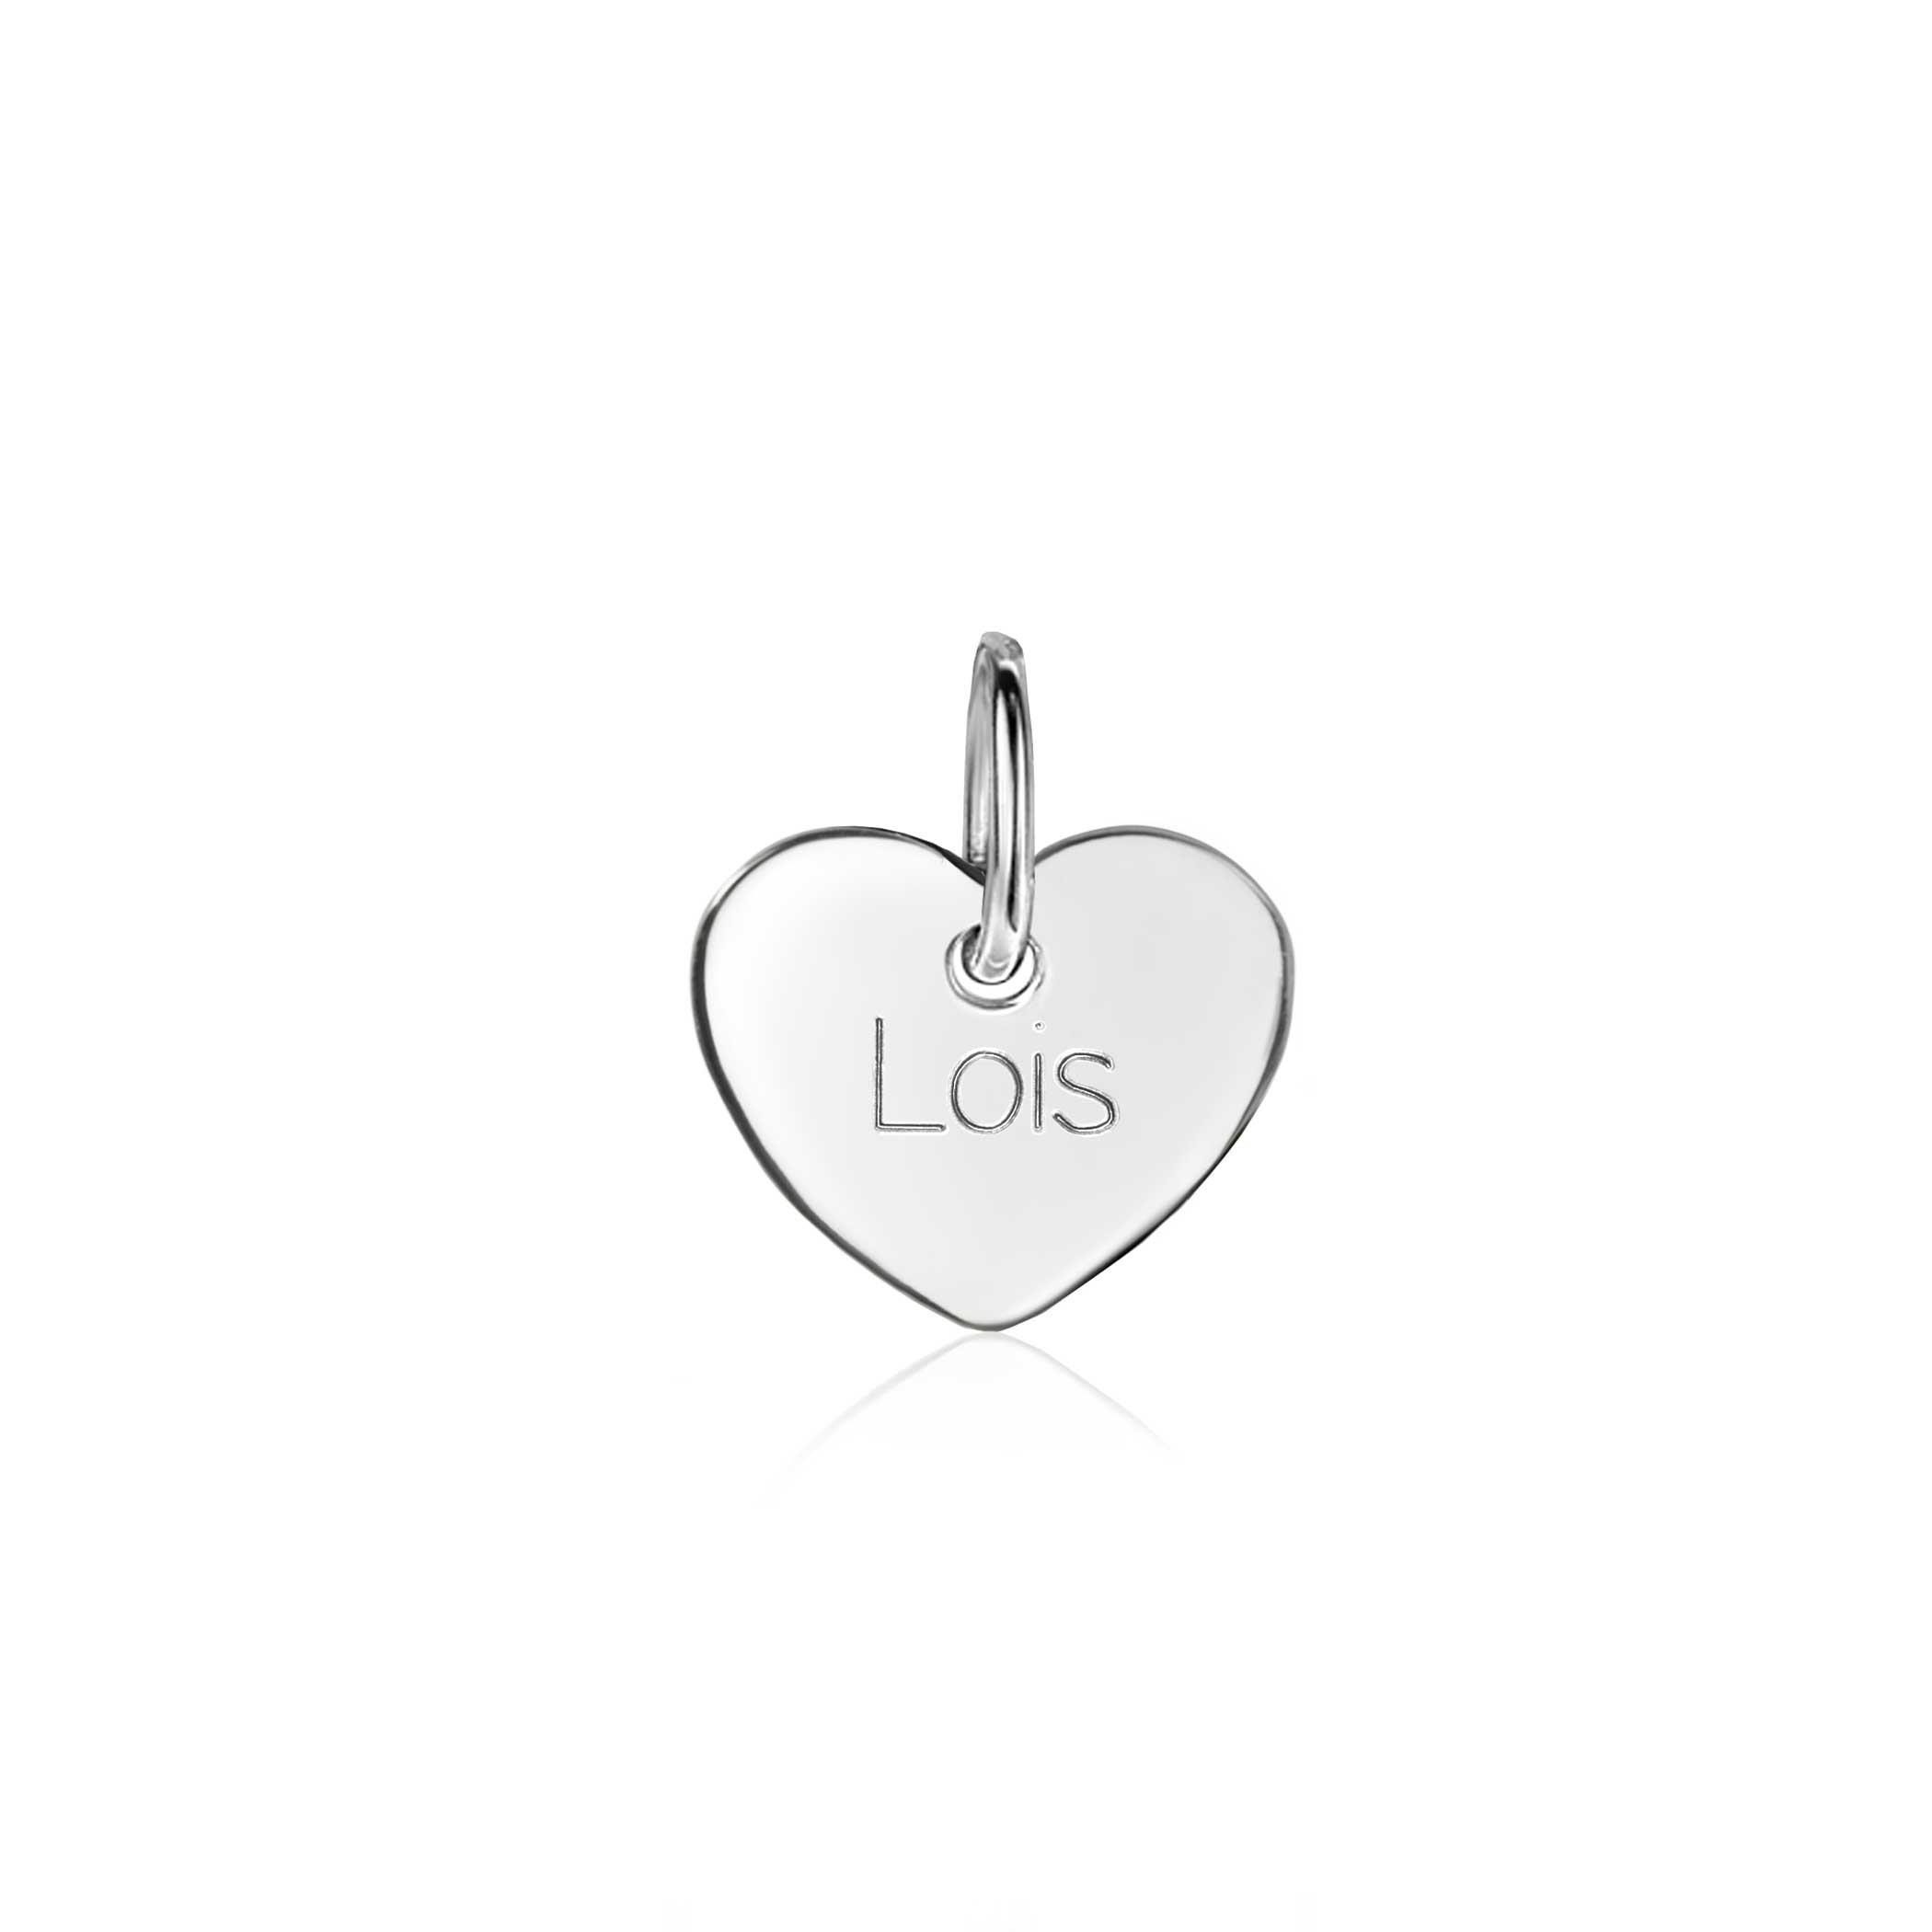 12mm ZINZI Sterling Silver Pendant Shiny Heart to Engrave ZIH2346-12 (excl. necklace)